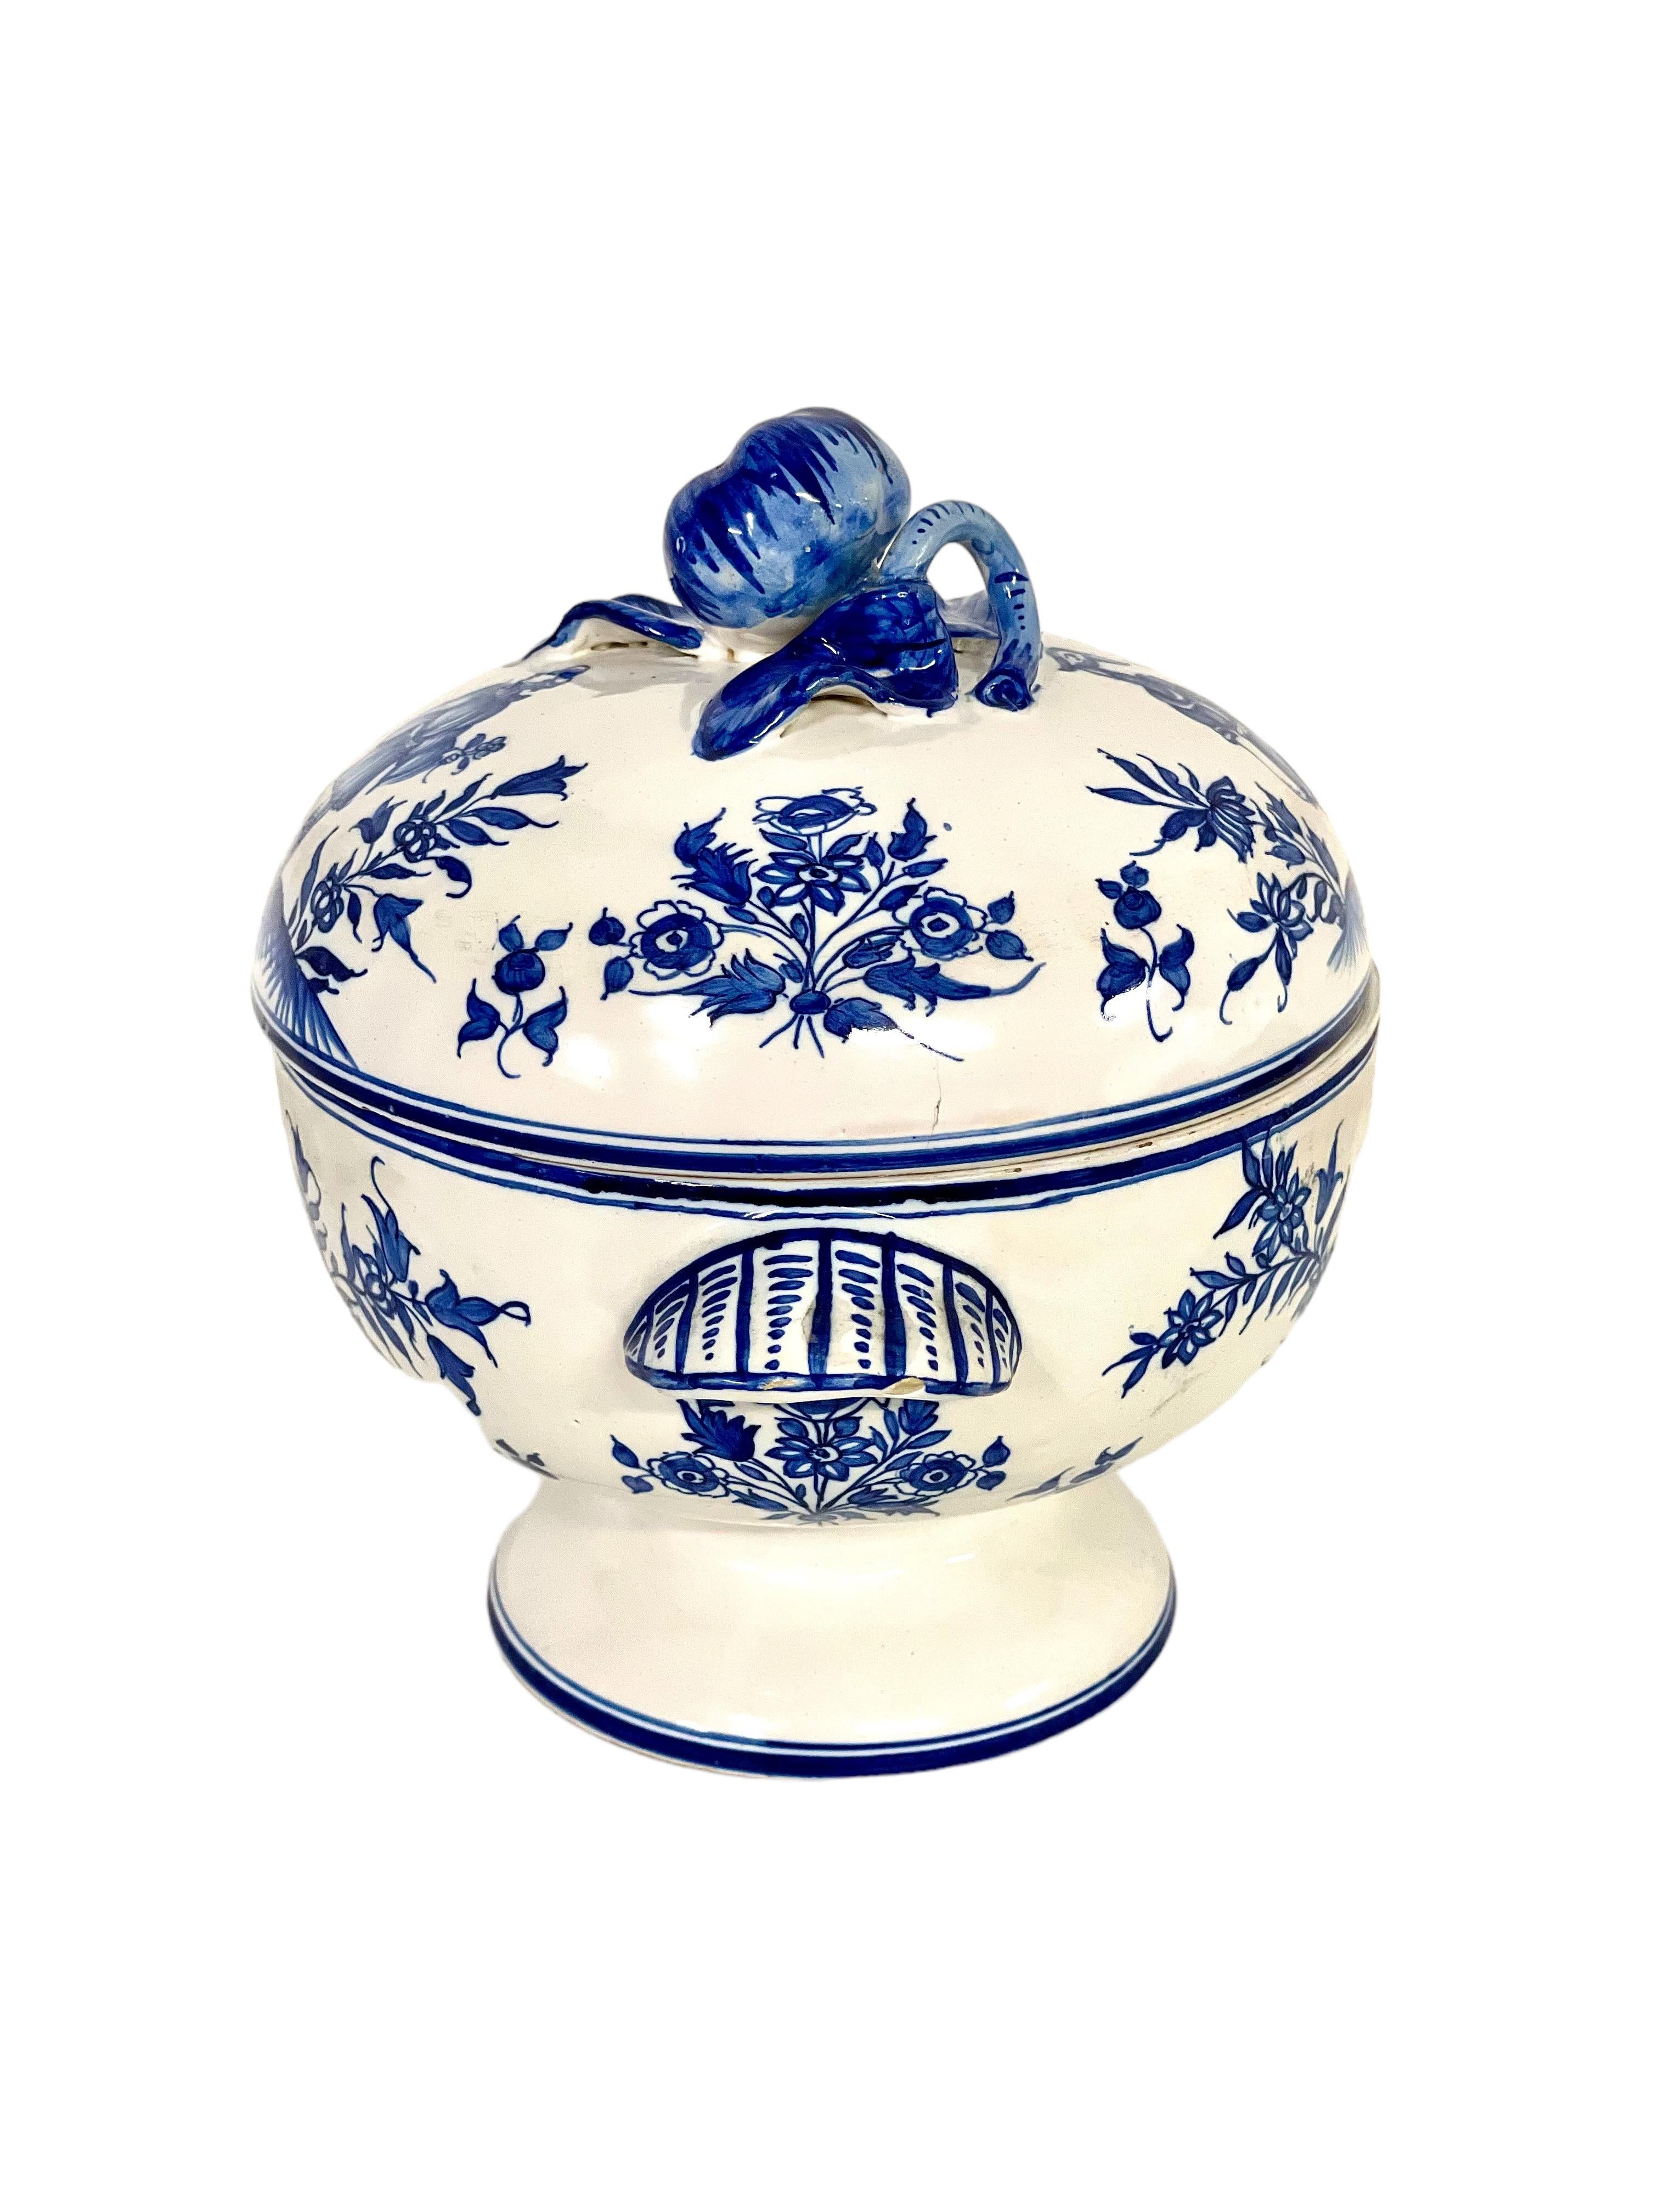 Blue and White Earthenware Lidded Tureen with Fantastical Decoration For Sale 7